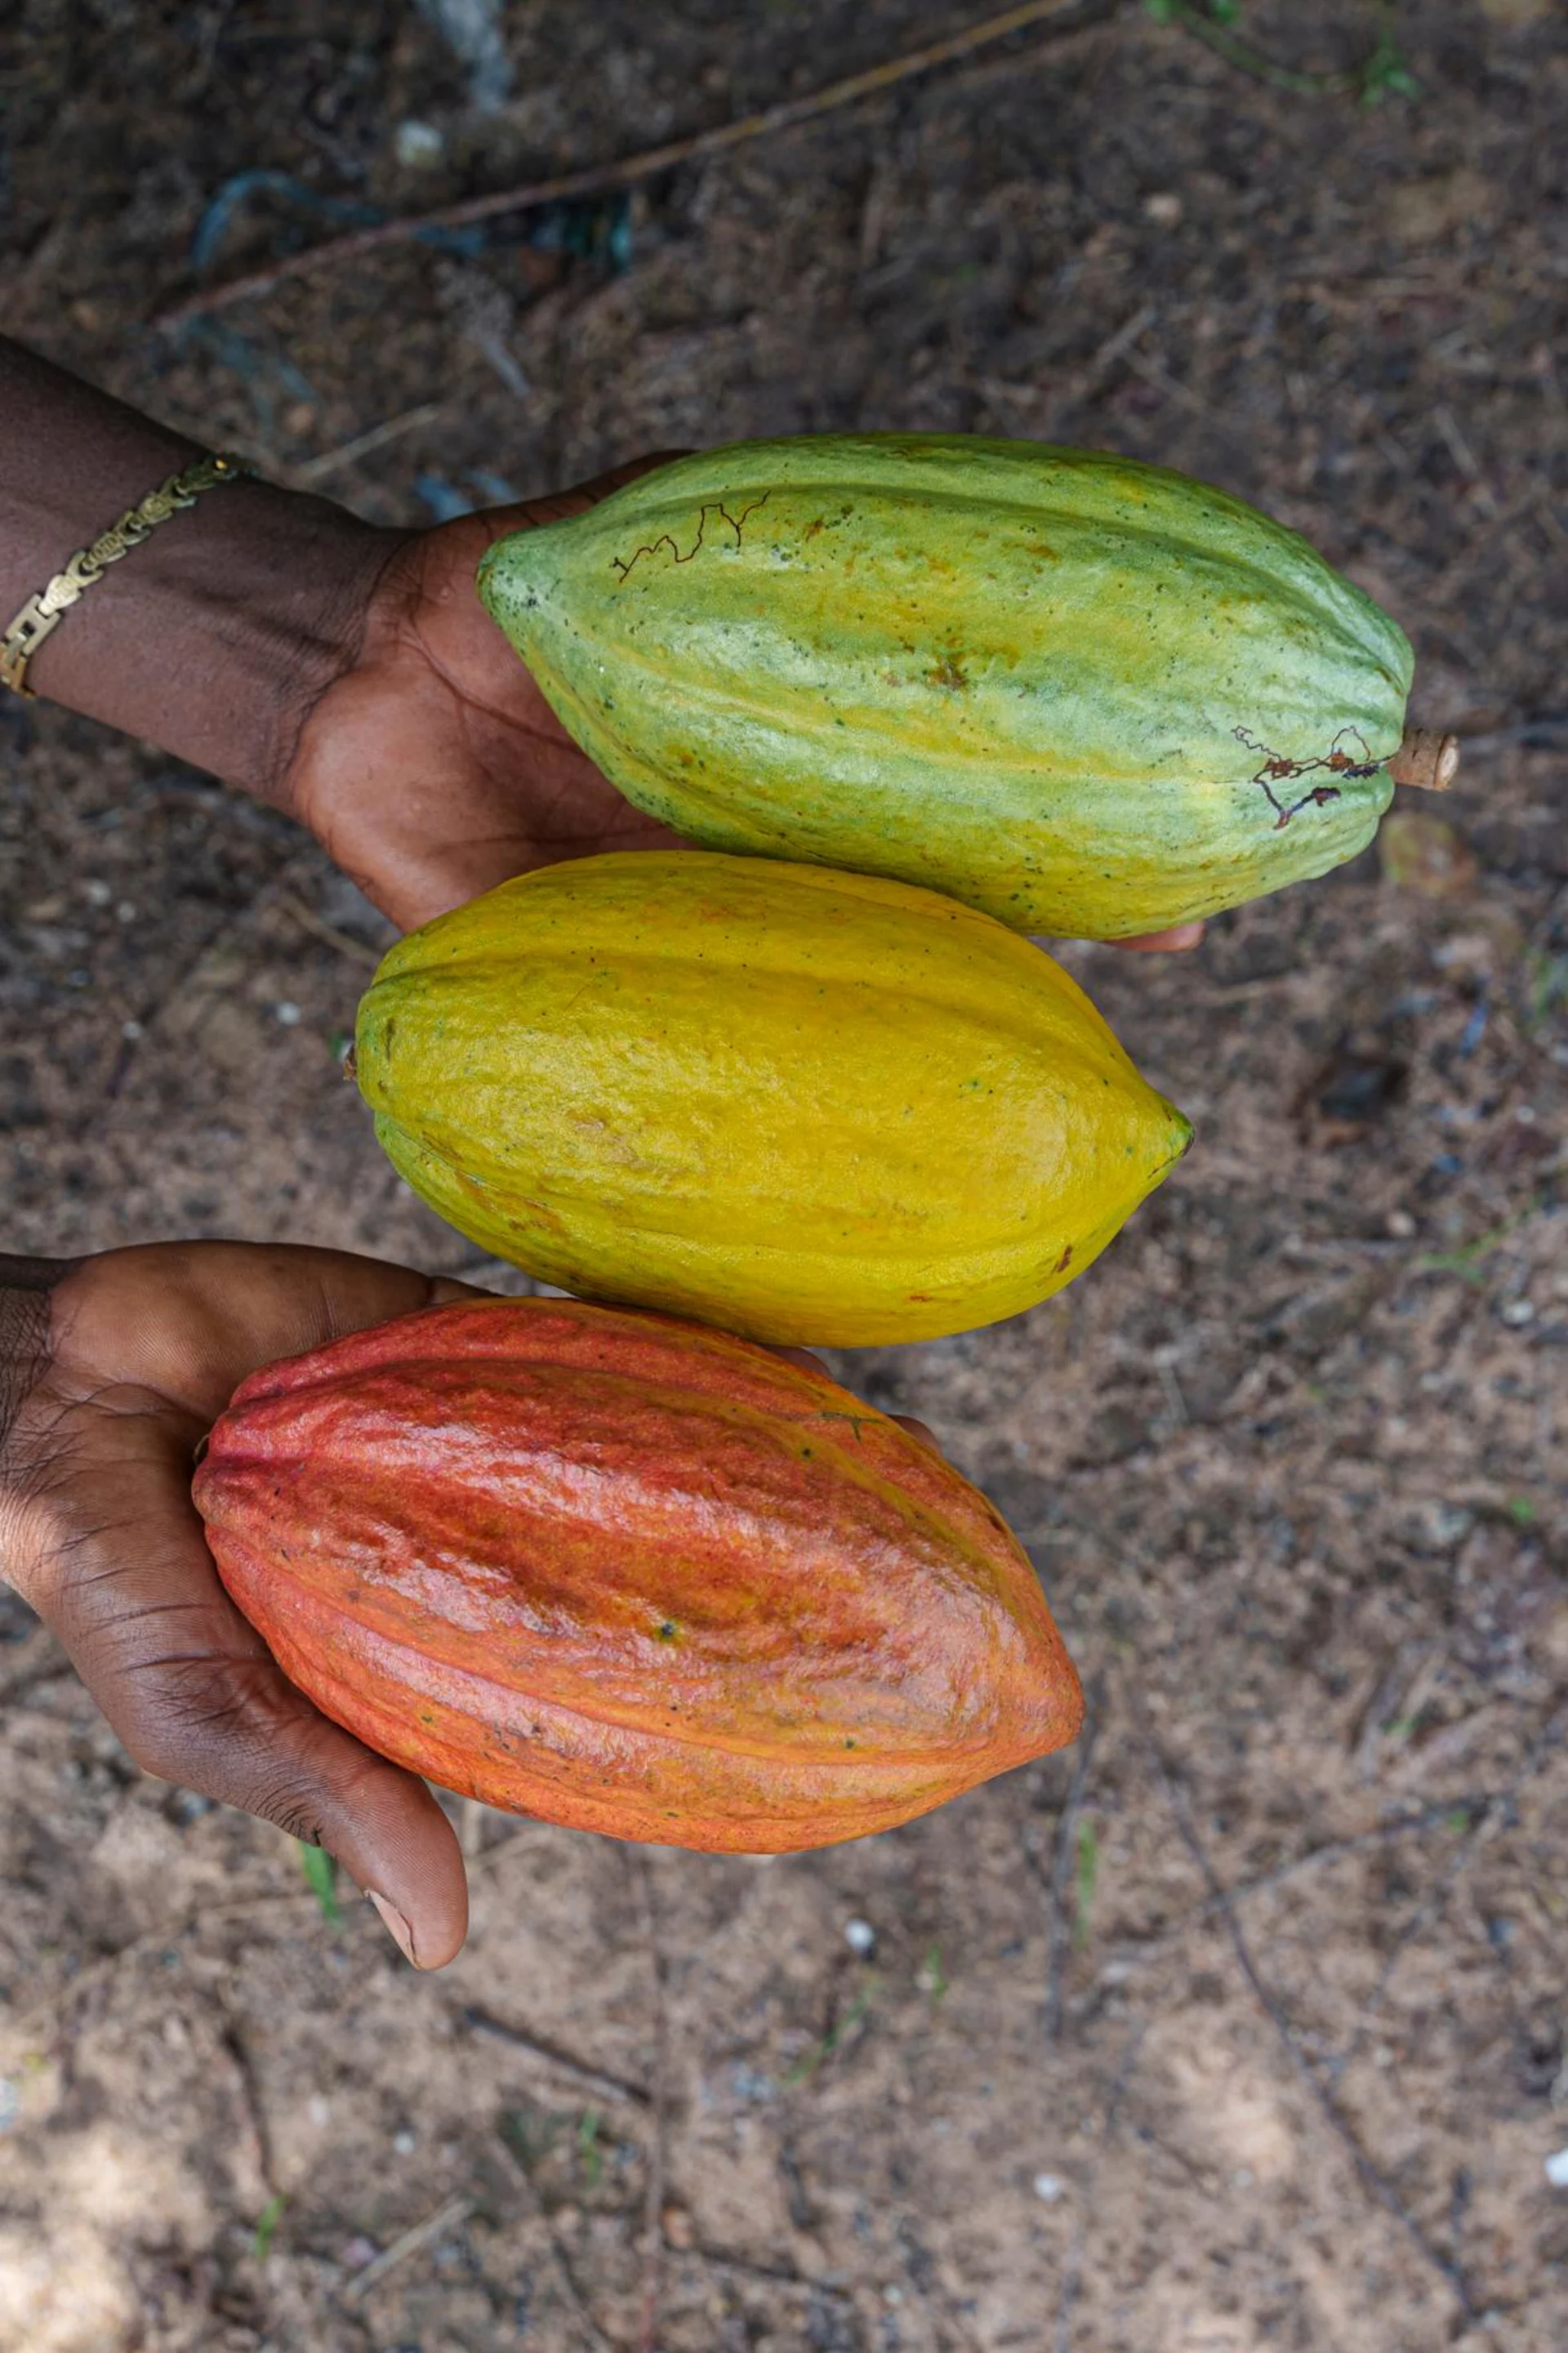 Three cocoa beans in red, green and yellow